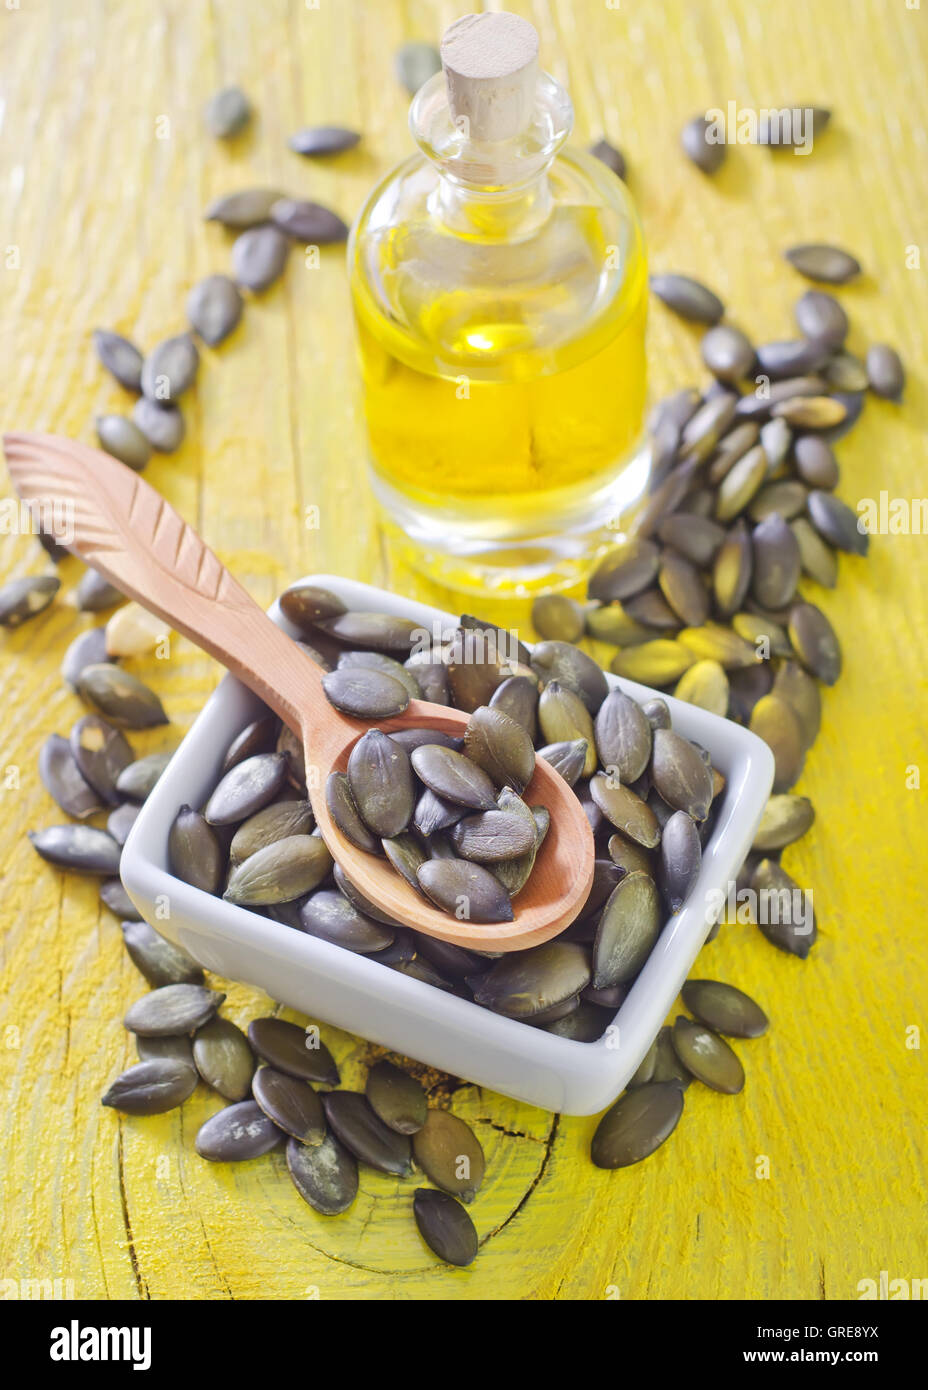 pumpkin seed and oil Stock Photo